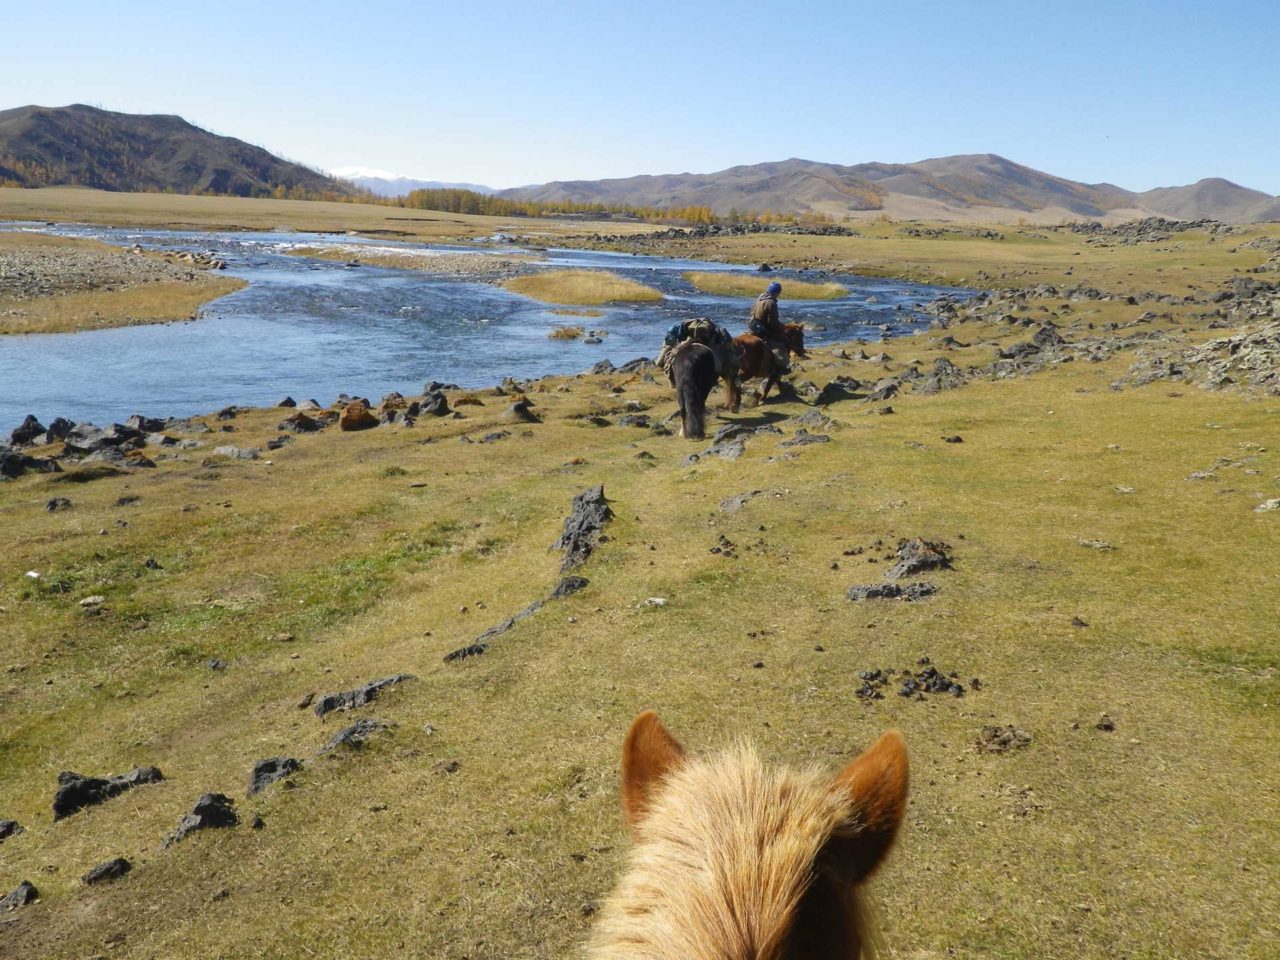 JOurney by horse in Mongolia